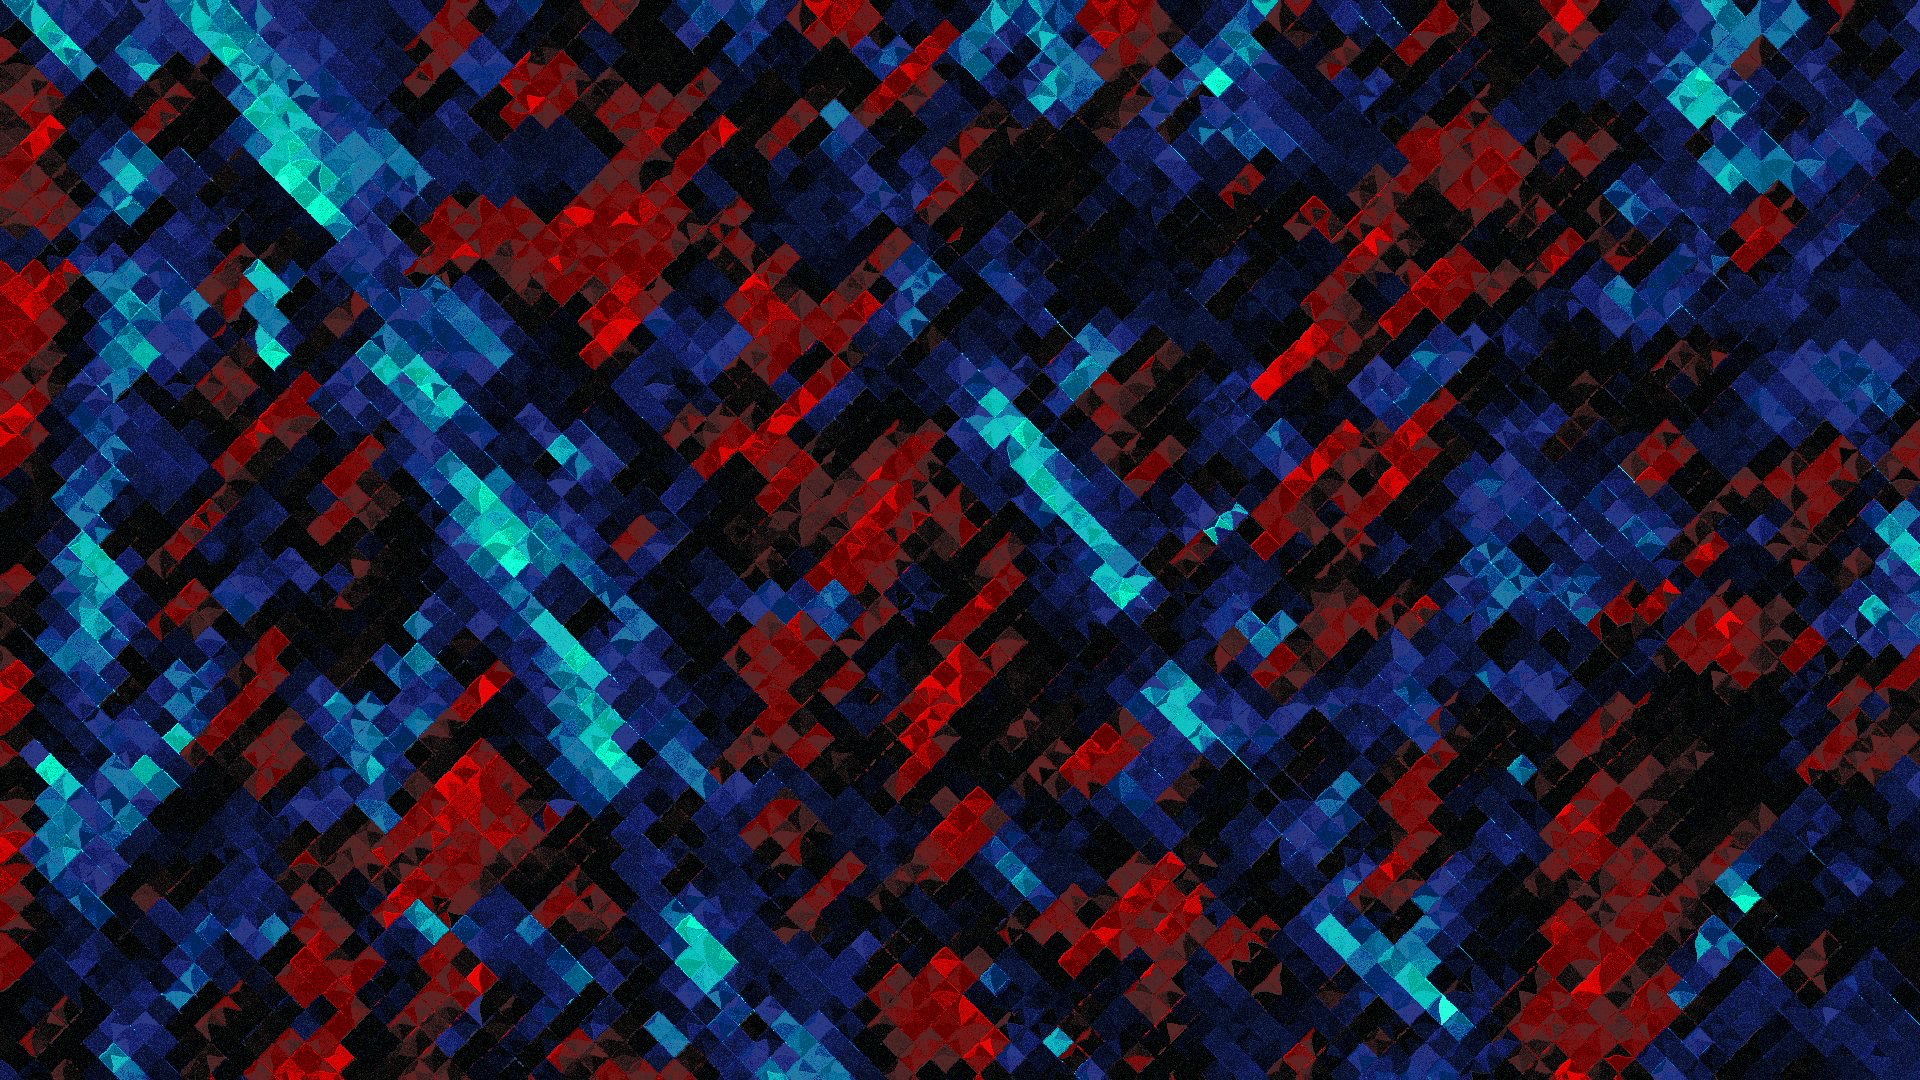 General 1920x1080 abstract texture red blue dark pattern shapes minimalism digital art square tiles